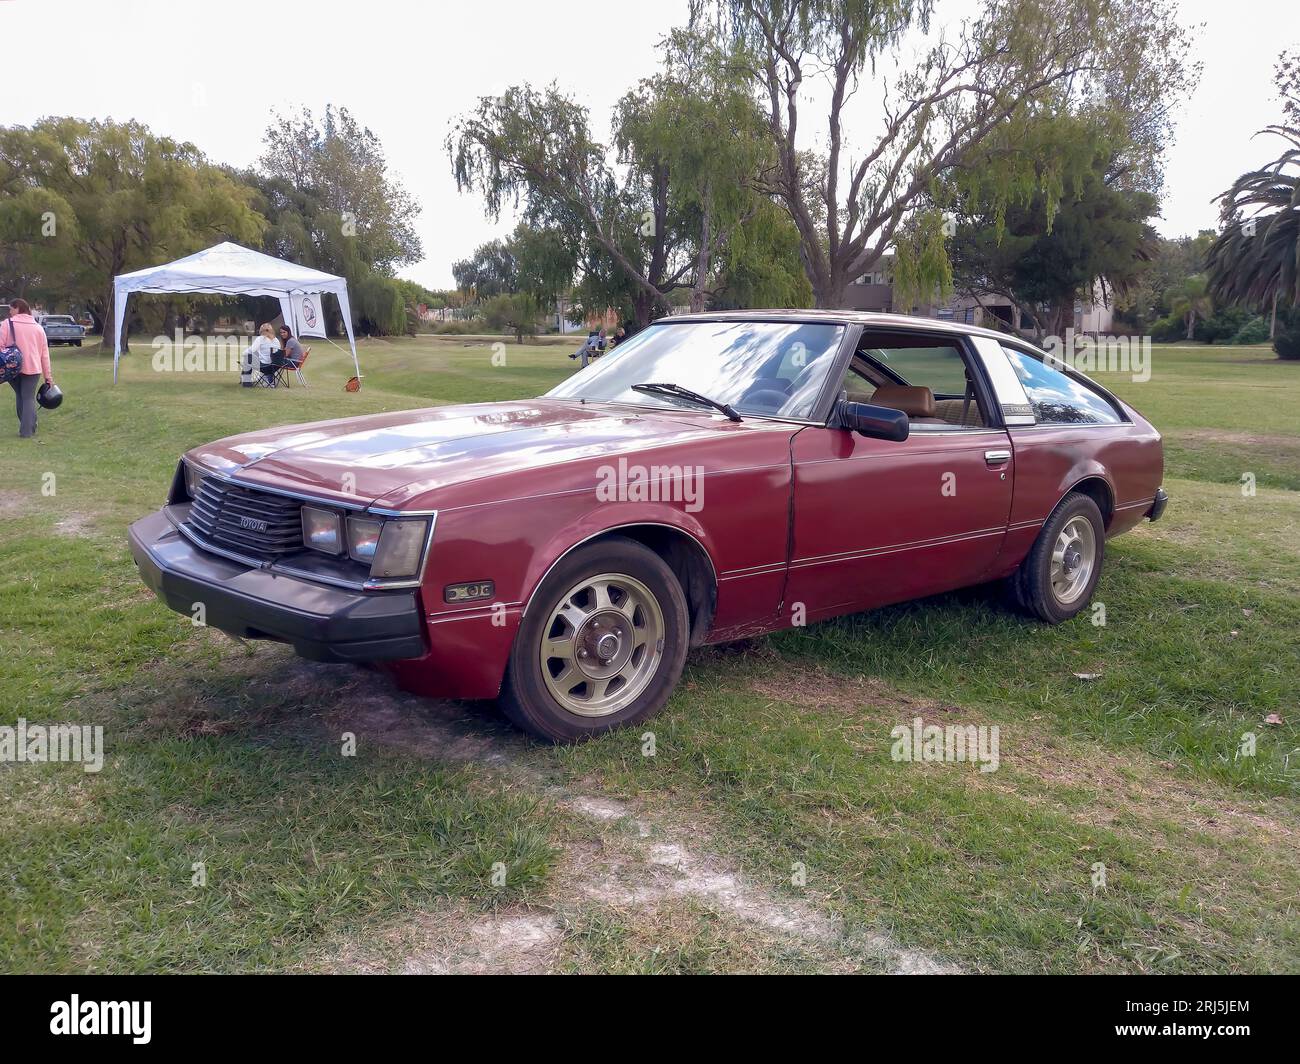 Old red burgundy Toyota Celica Series B coupe circa 1980 on the lawn. Nature, grass, trees. CAACMACH 2023 classic car show. Stock Photo